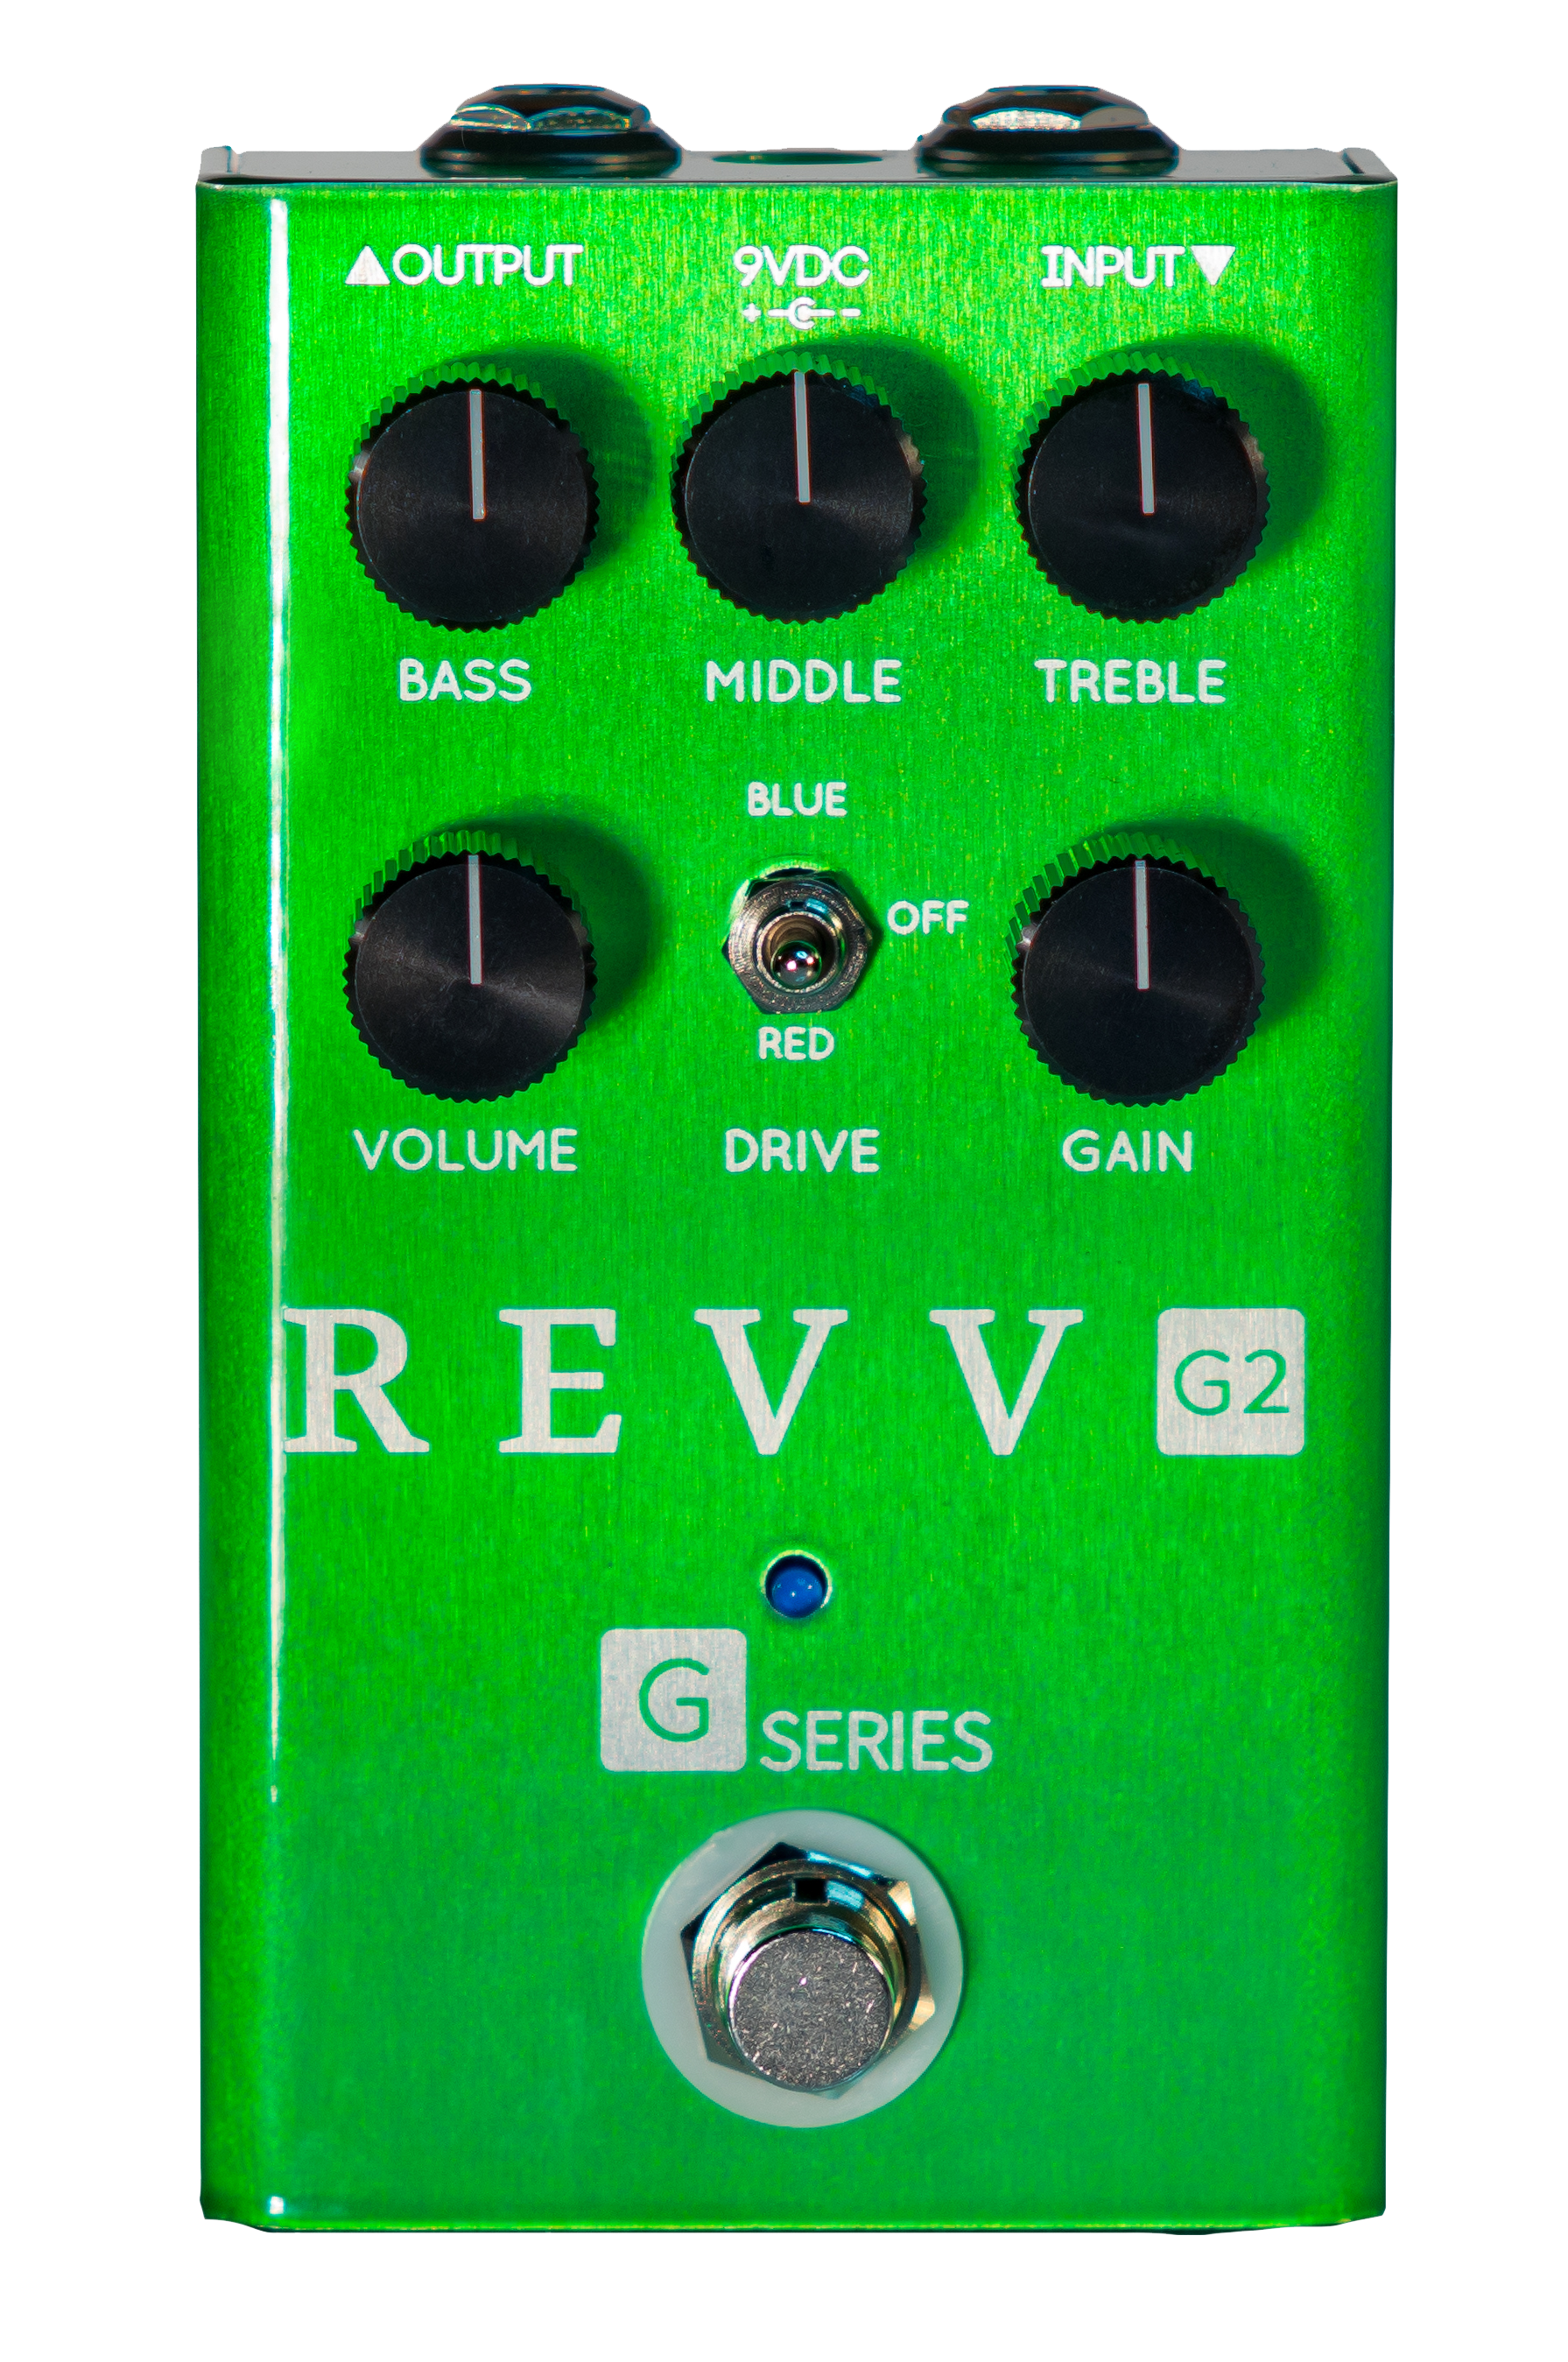 Top down of Revv G2 Preamp/Overdrive/Distortion Green.